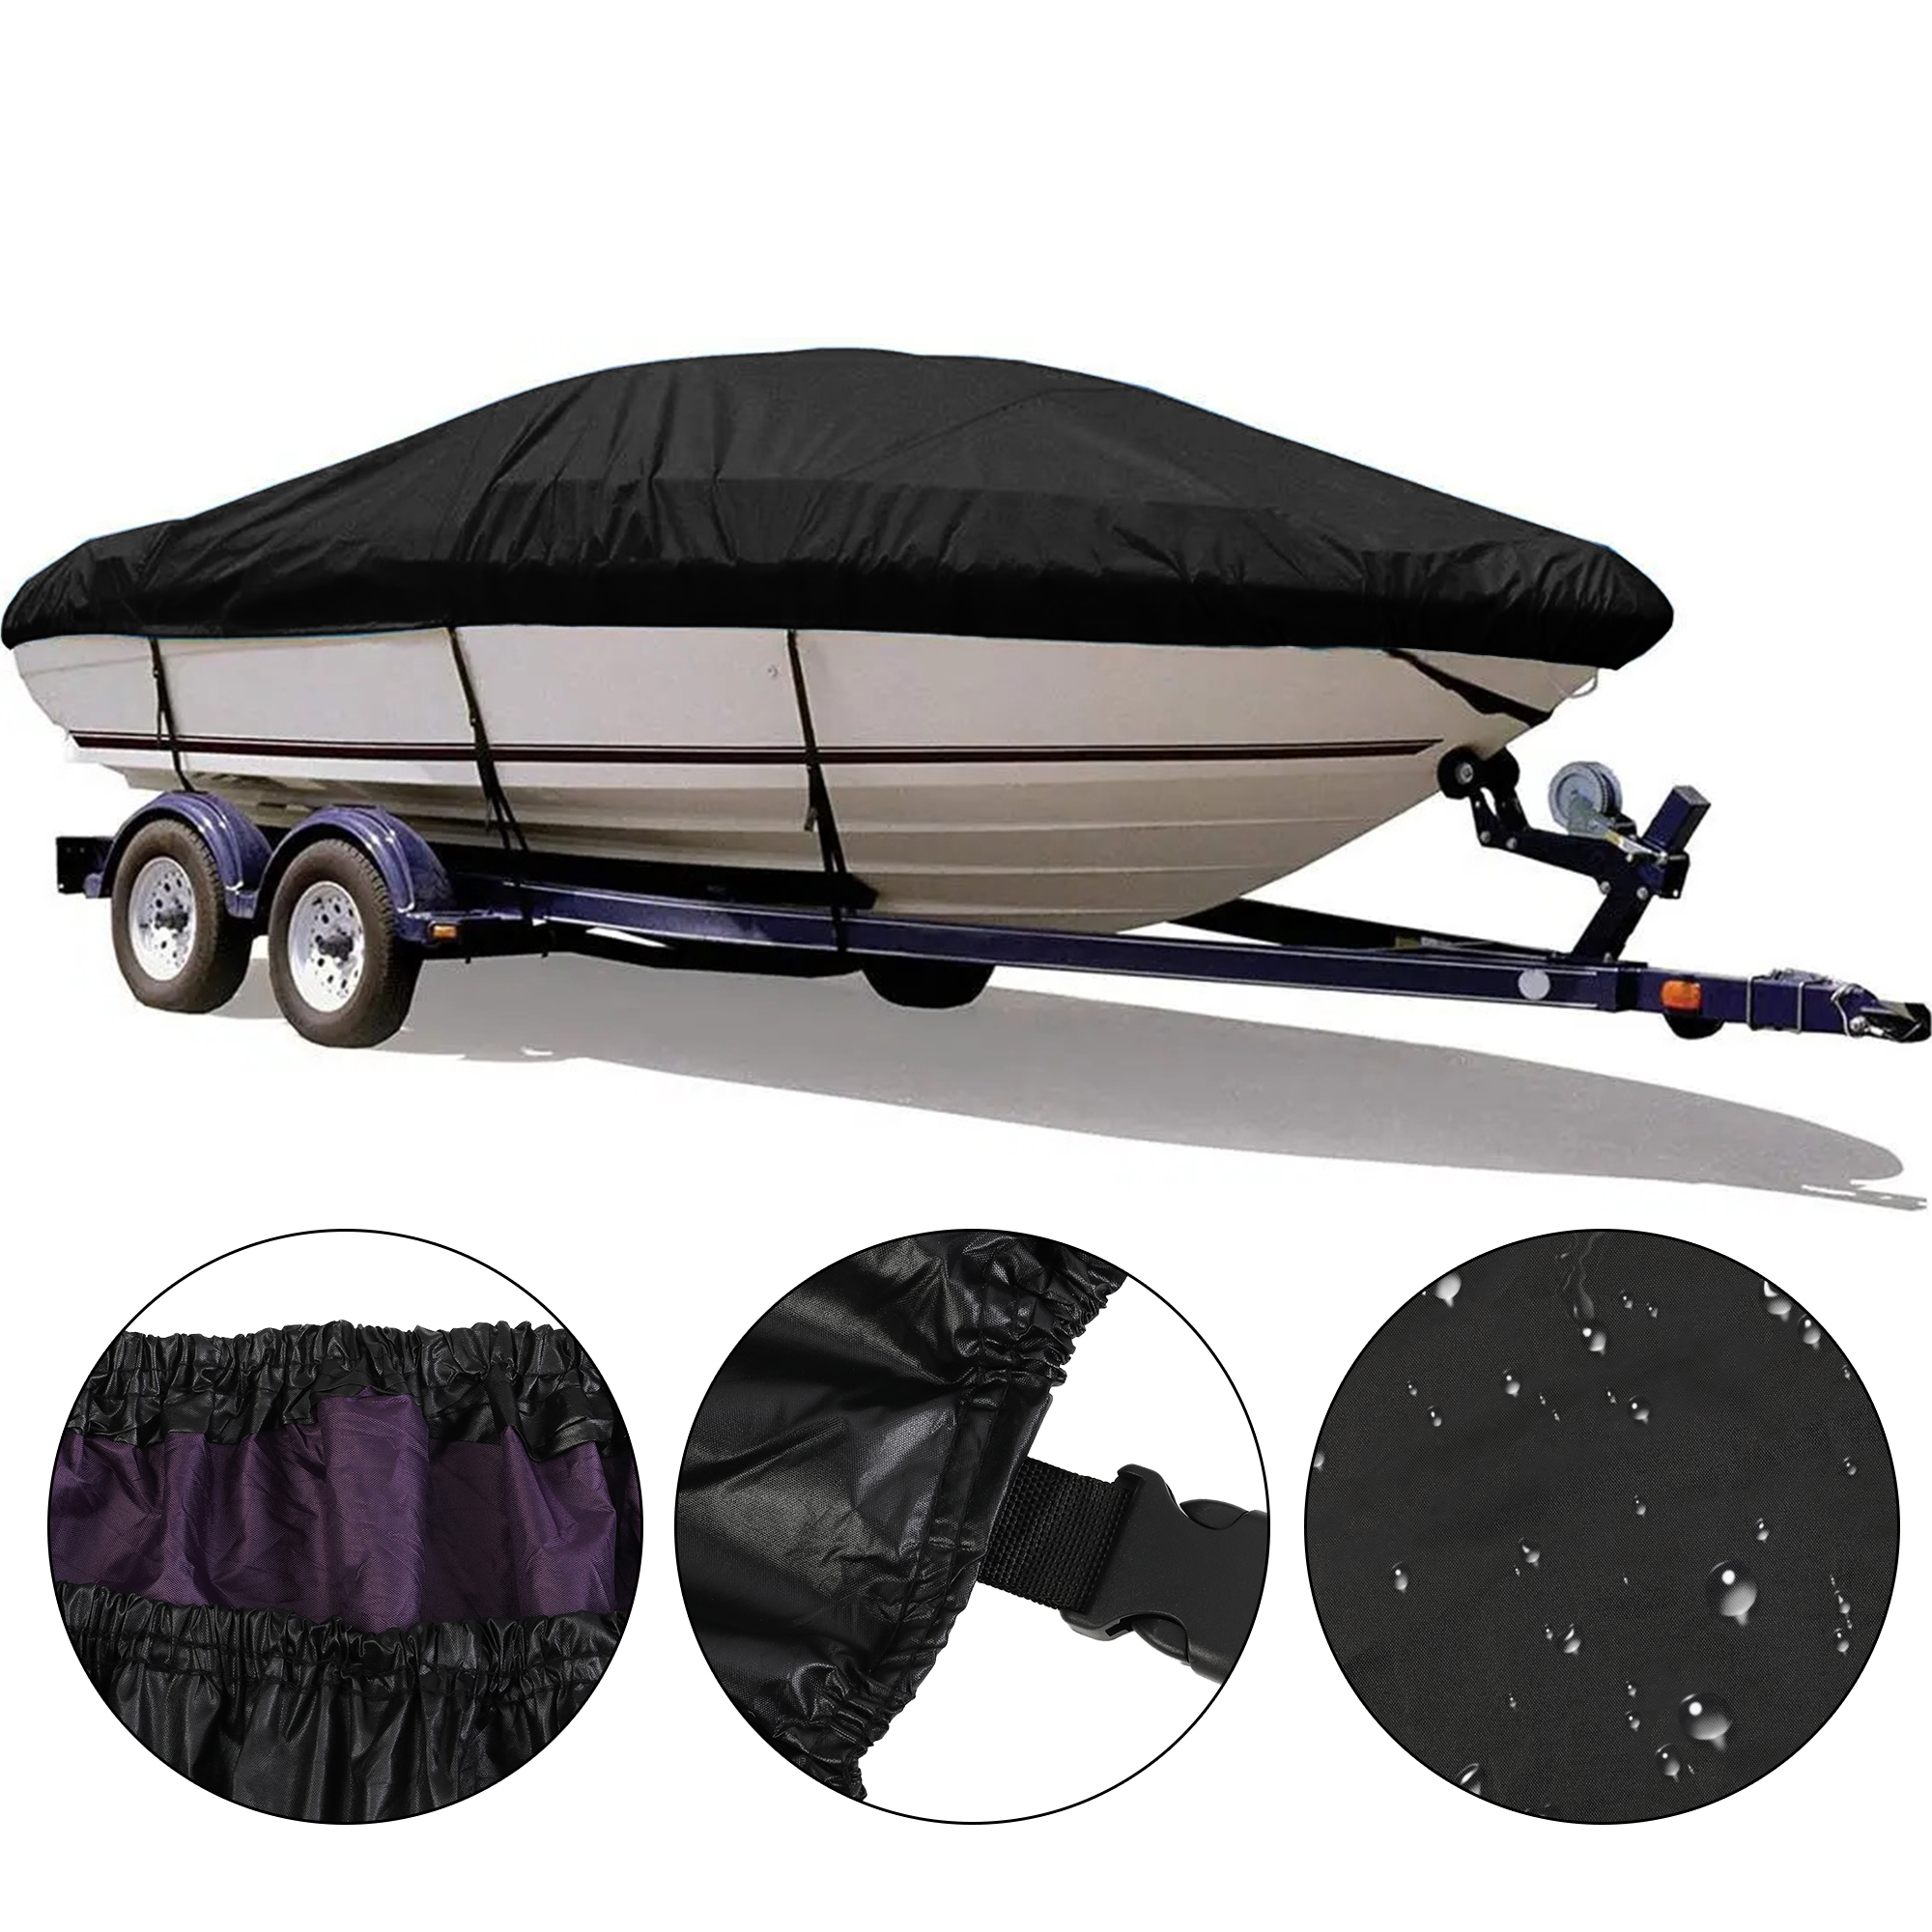 Heavy Duty Waterproof Boat Cover Light Weight Fits V-Hull Tri-Hull Runabouts  and Bass Boats Accessories 17-19ft